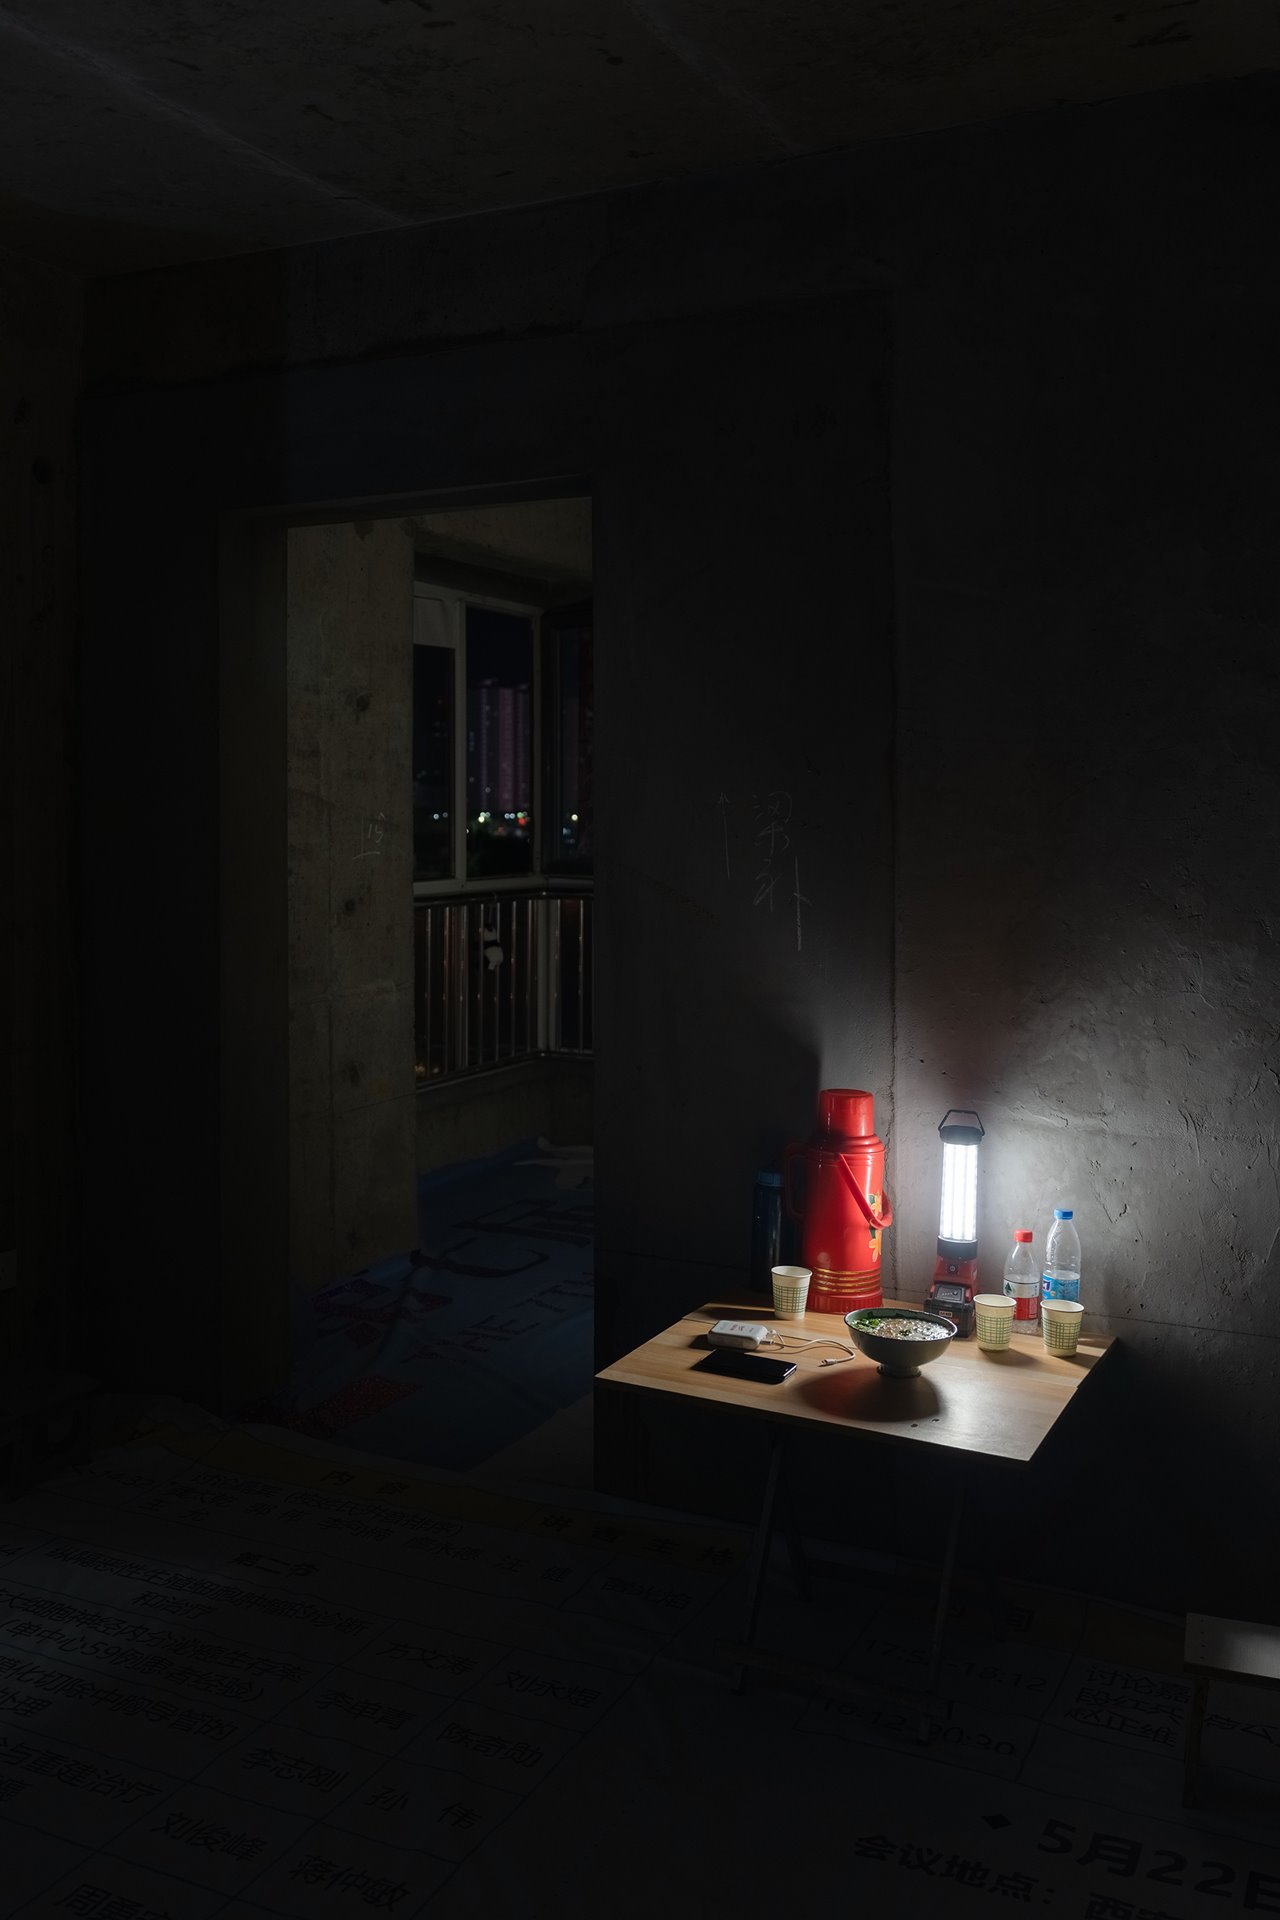 A view inside a home with no running water or electricity in the Yihefang development in Xi&rsquo;an, China. The Yihefang development project has stood unfinished for the past eight years.&nbsp;